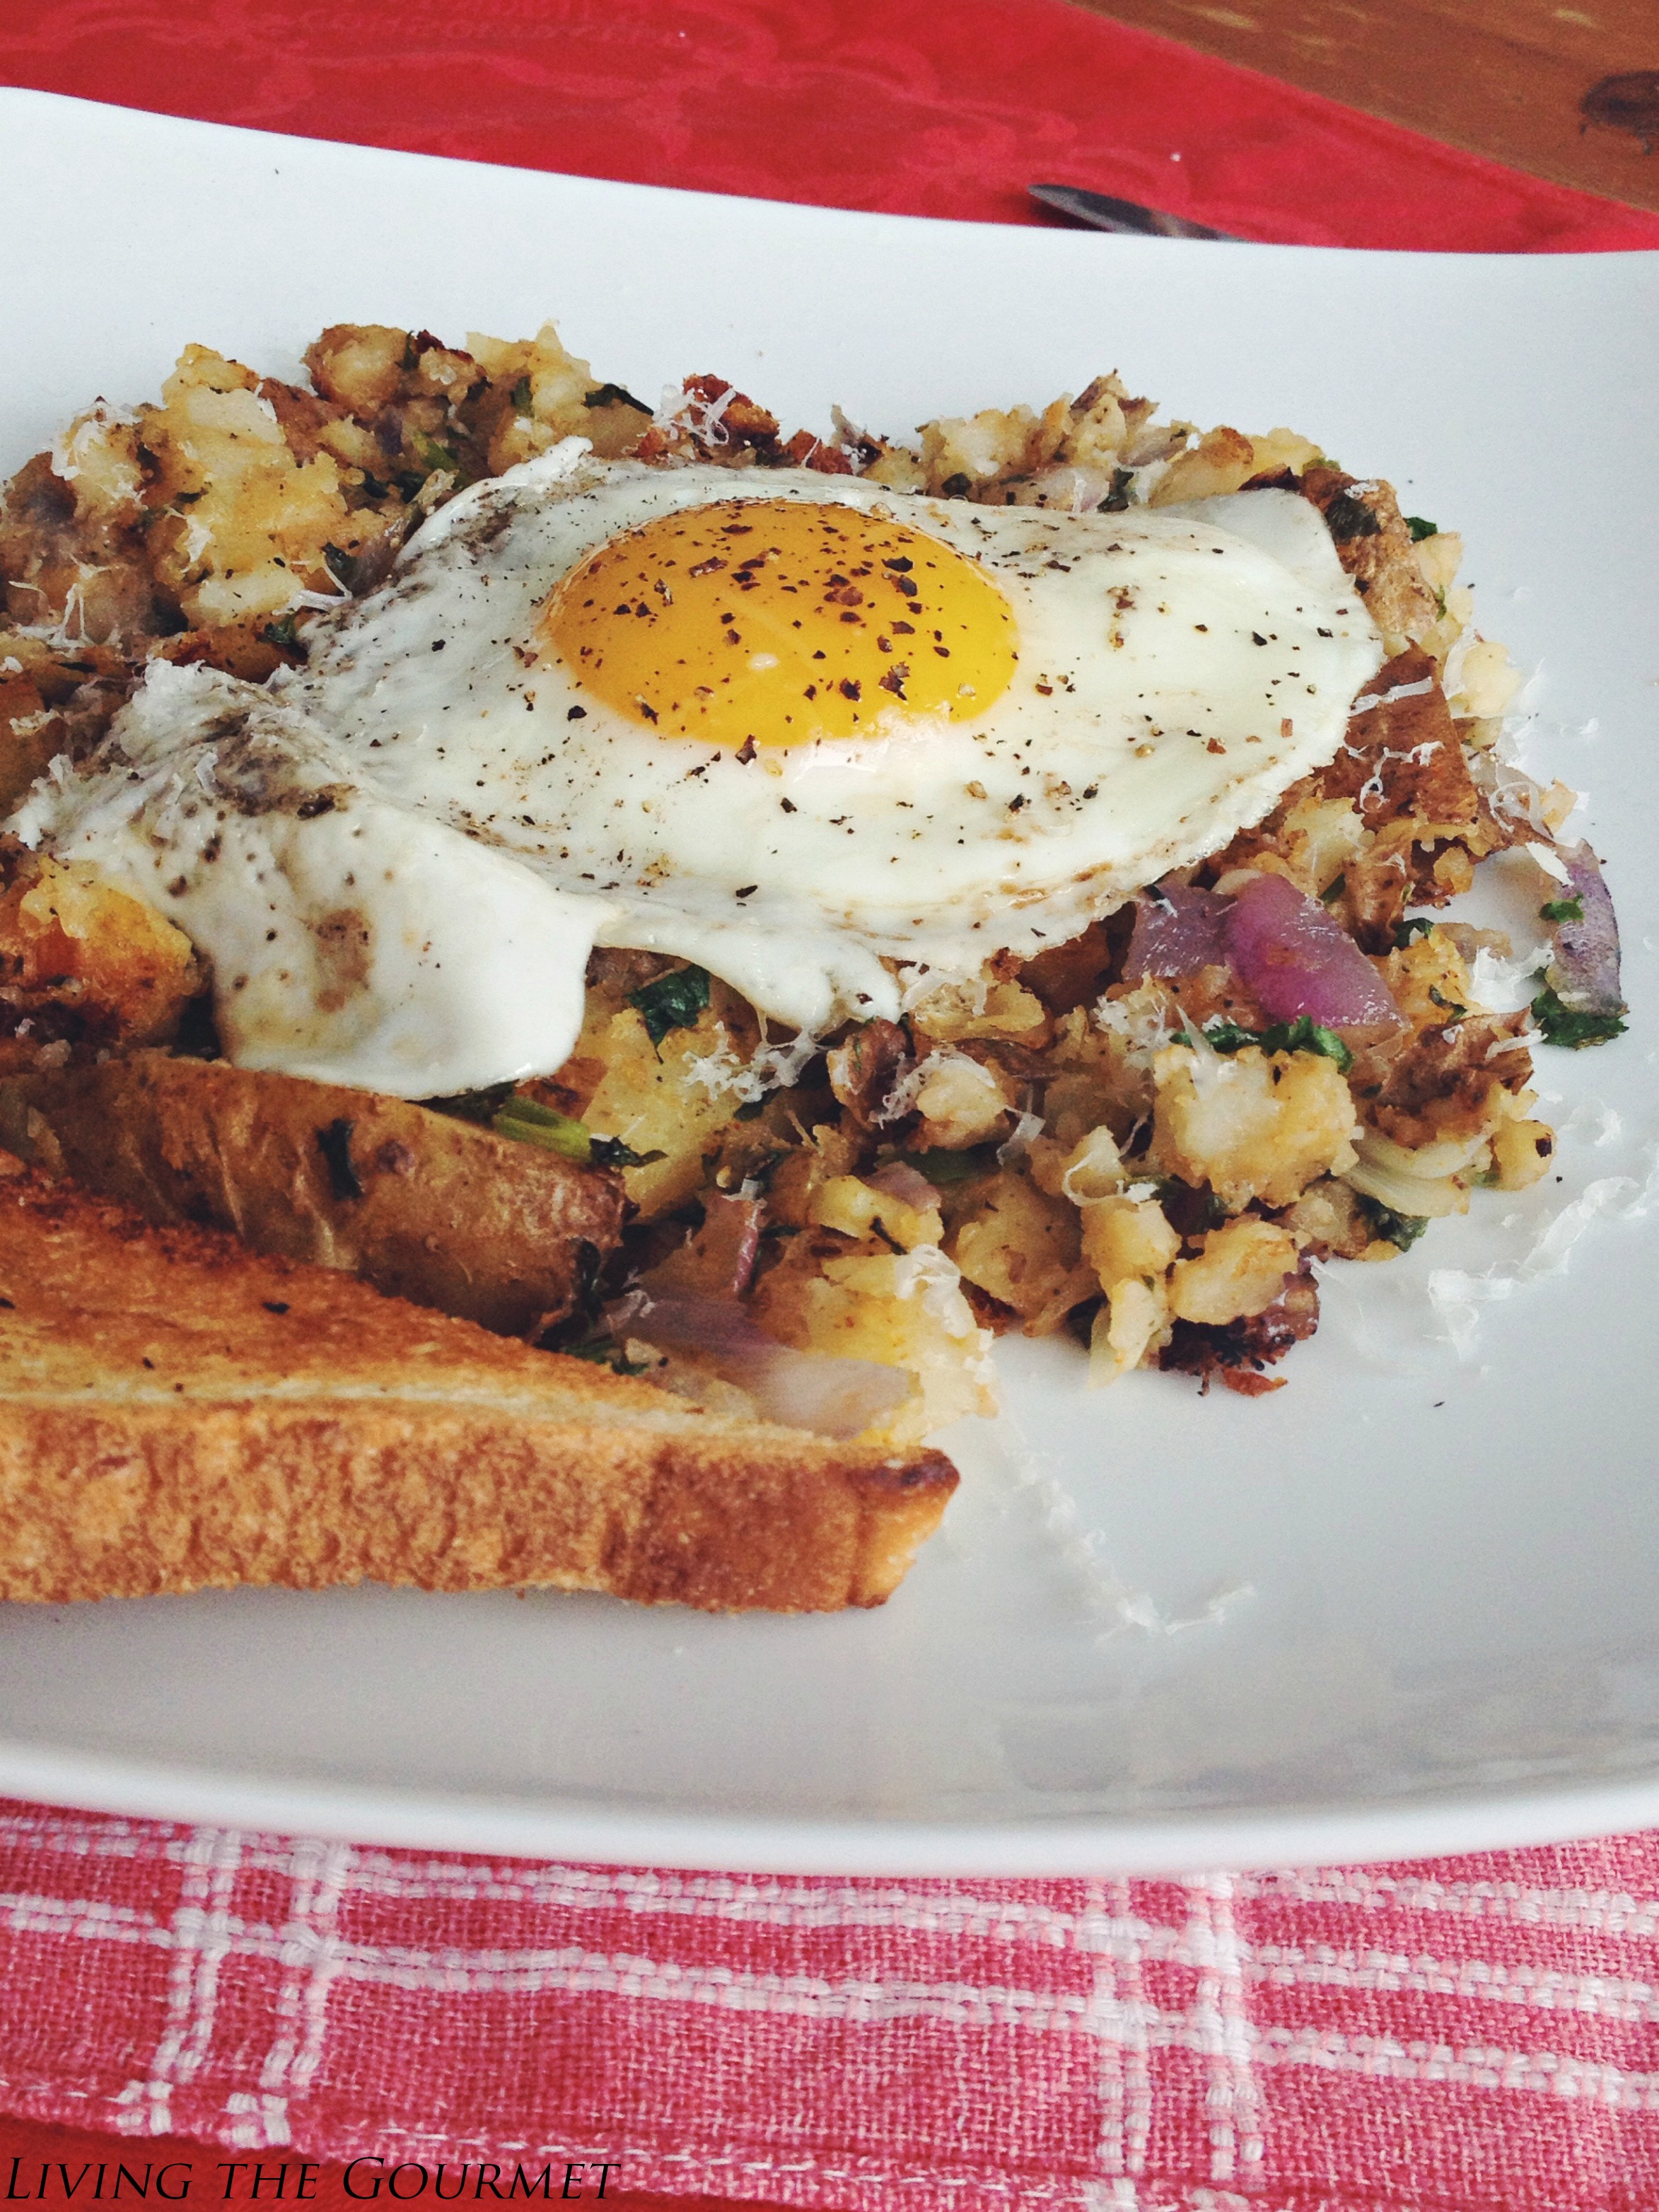 Living the Gourmet: Home Fries and Eggs